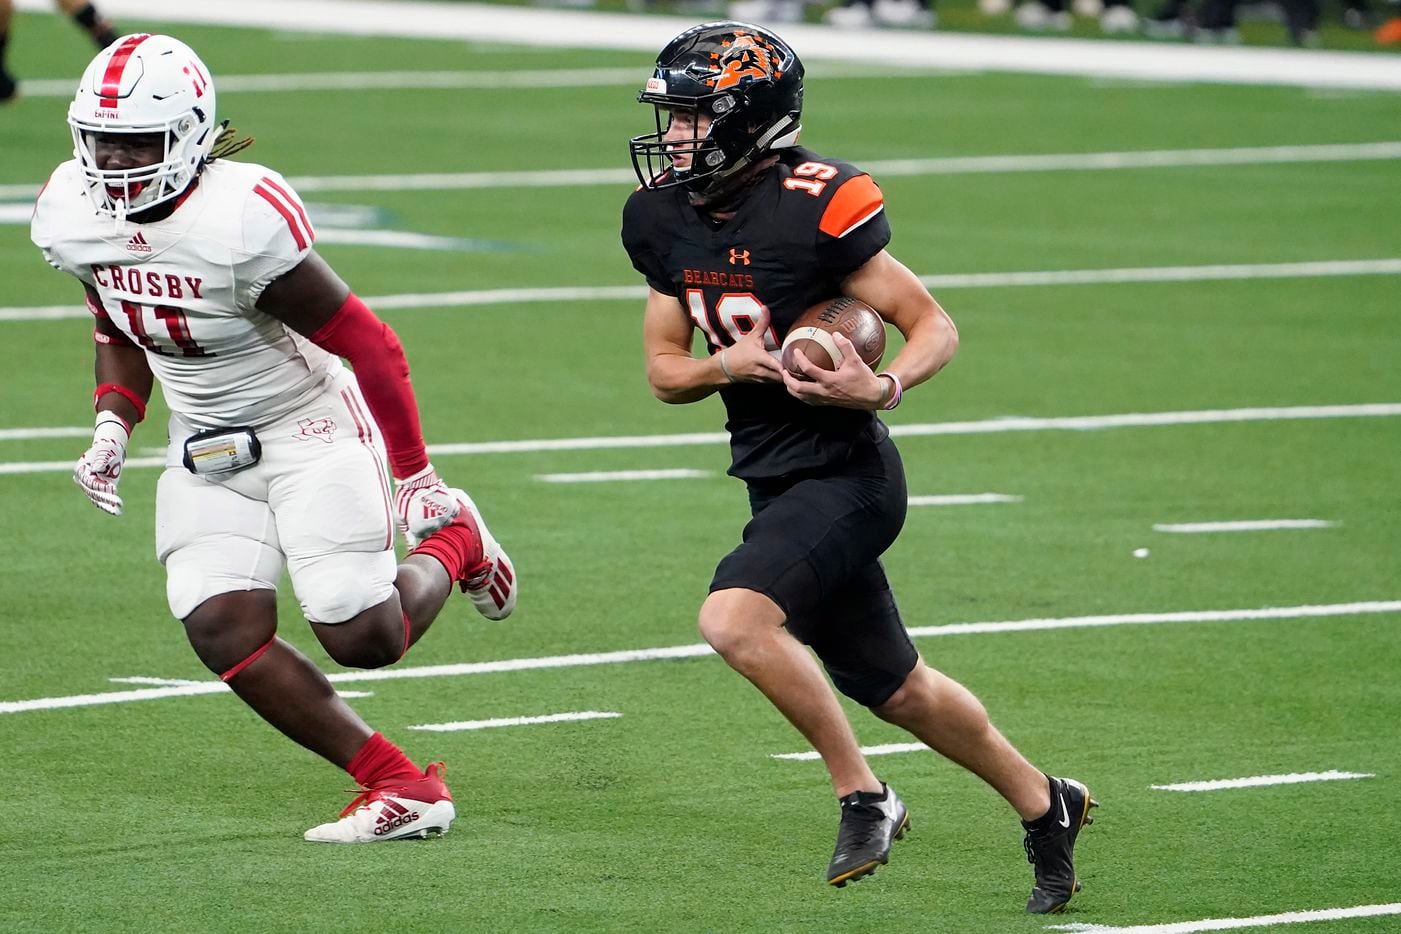 Aledo punder Clay Murador (19) gets past Crosby linebacker Jamauri Johnson (11) for a first down on a fake punt during the first half of the Class 5A Division II state football championship game at AT&T Stadium on Friday, Jan. 15, 2021, in Arlington. (Smiley N. Pool/The Dallas Morning News)